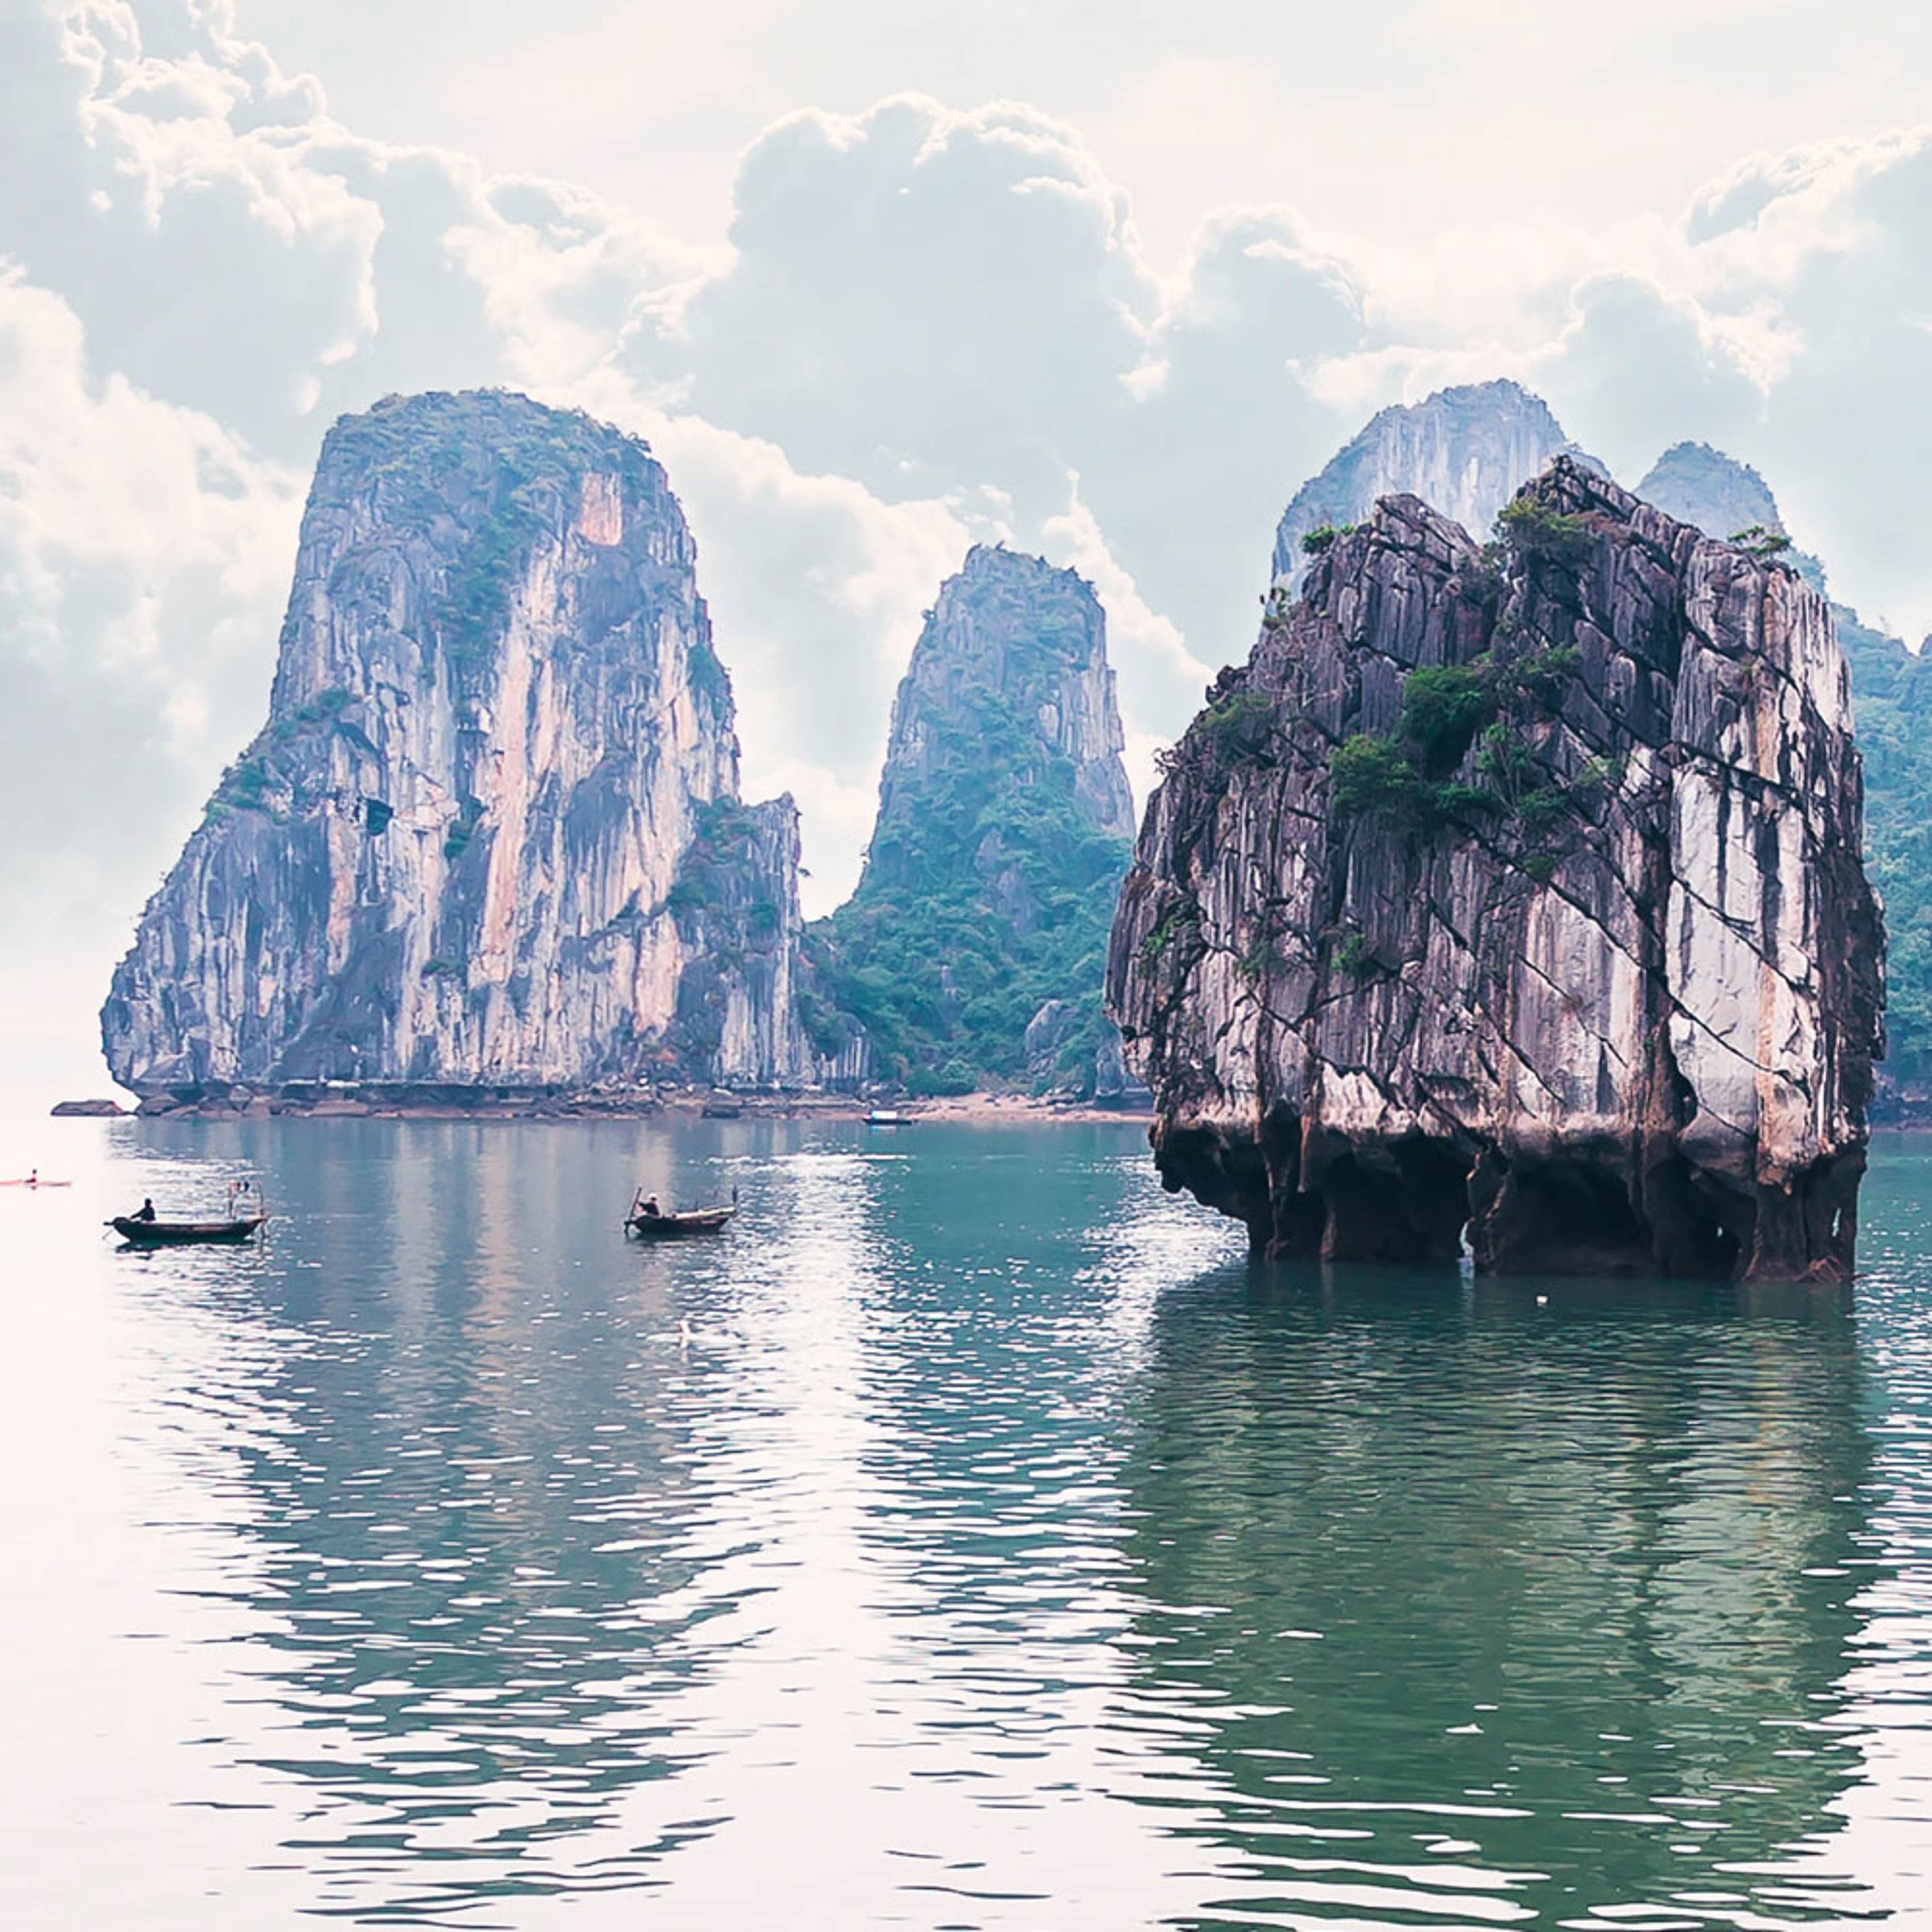 Design your perfect summer holiday in Vietnam with a local expert